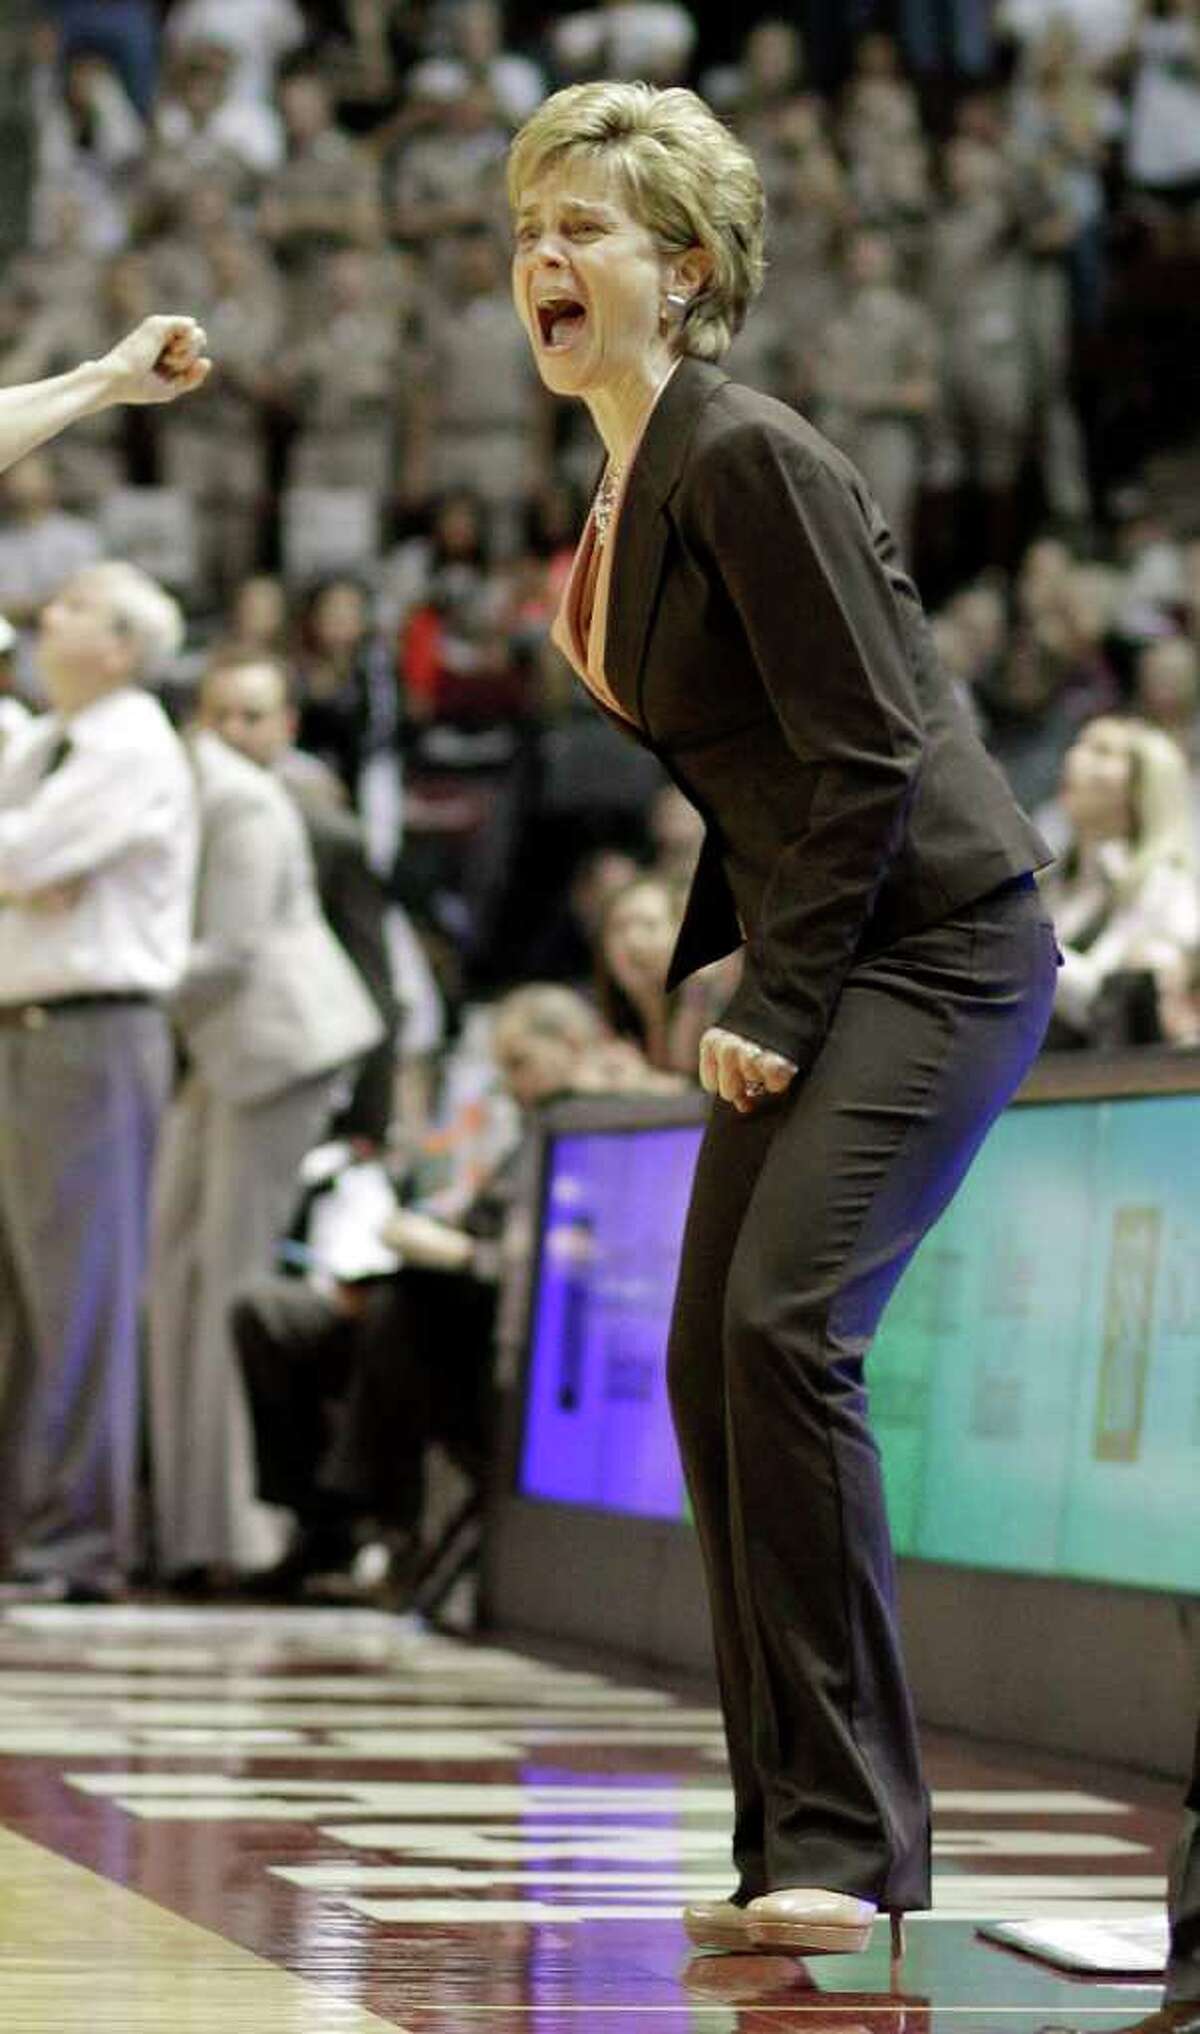 Baylor coach Kim Mulkey yells from the sidelines in the second half of an NCAA college basketball game against Texas A&M on Monday, Feb. 27, 2012, in College Station. Baylor won 69-62.